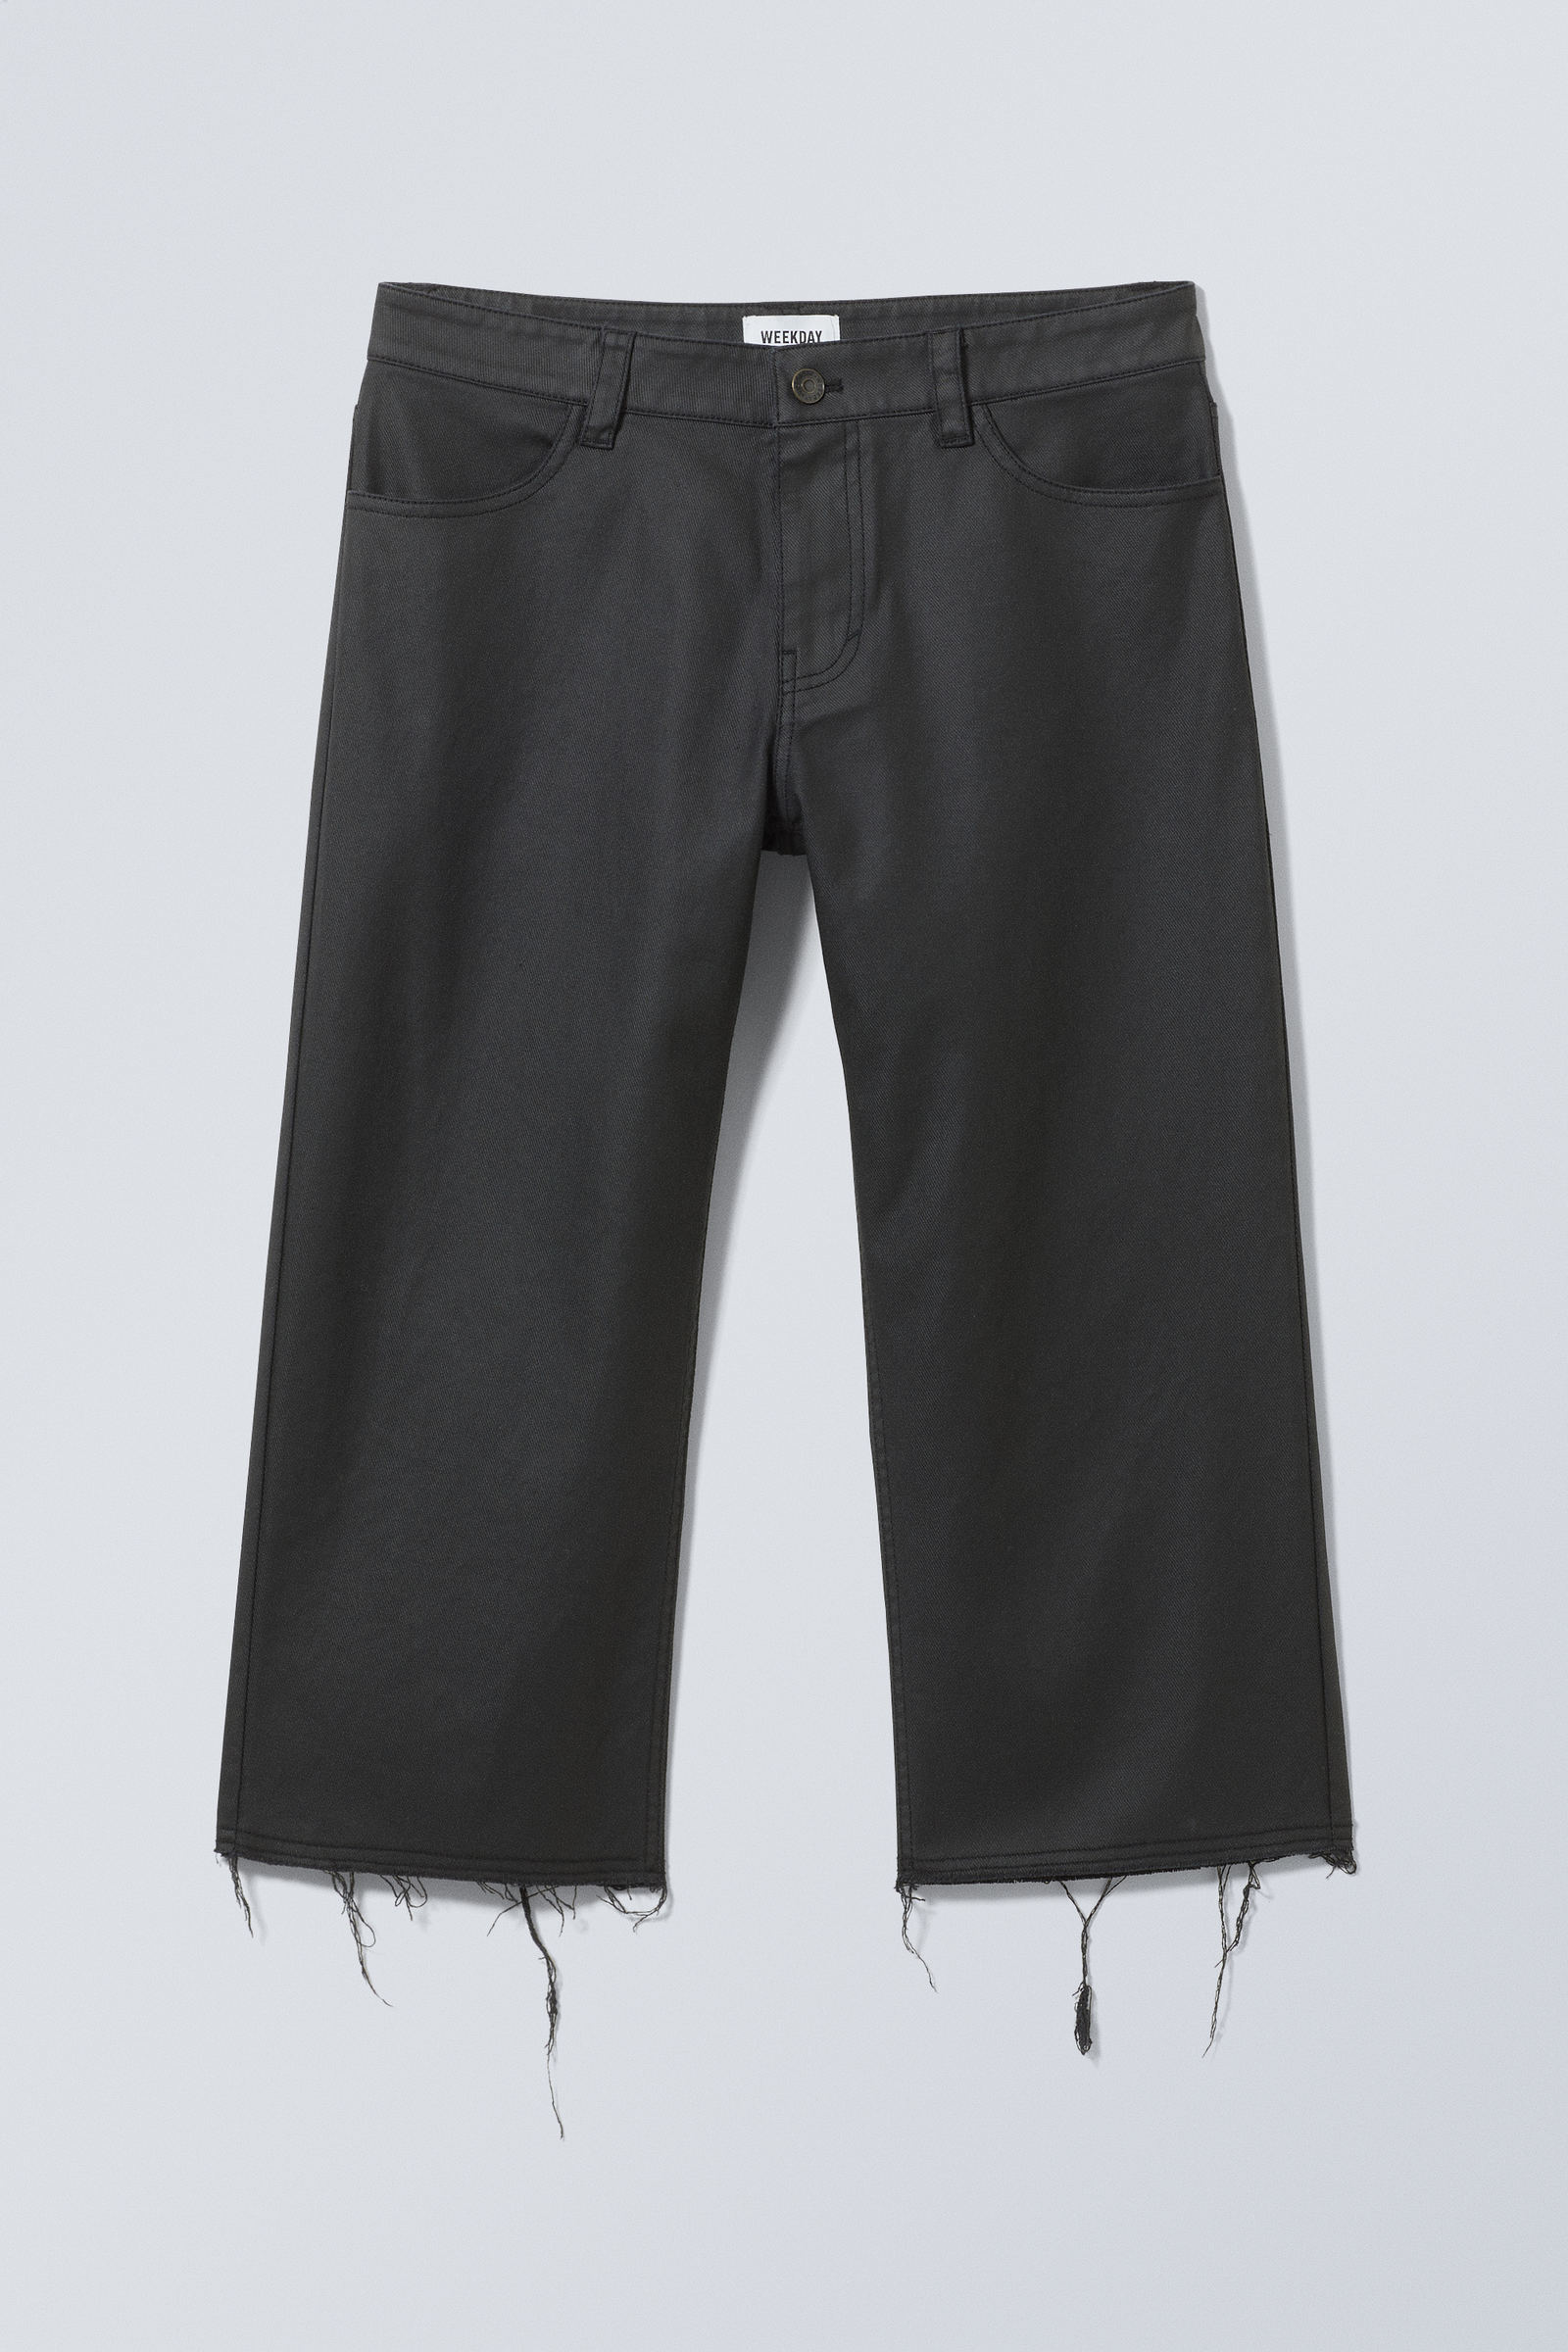 #272628 - Aceso Coated Trousers - 1